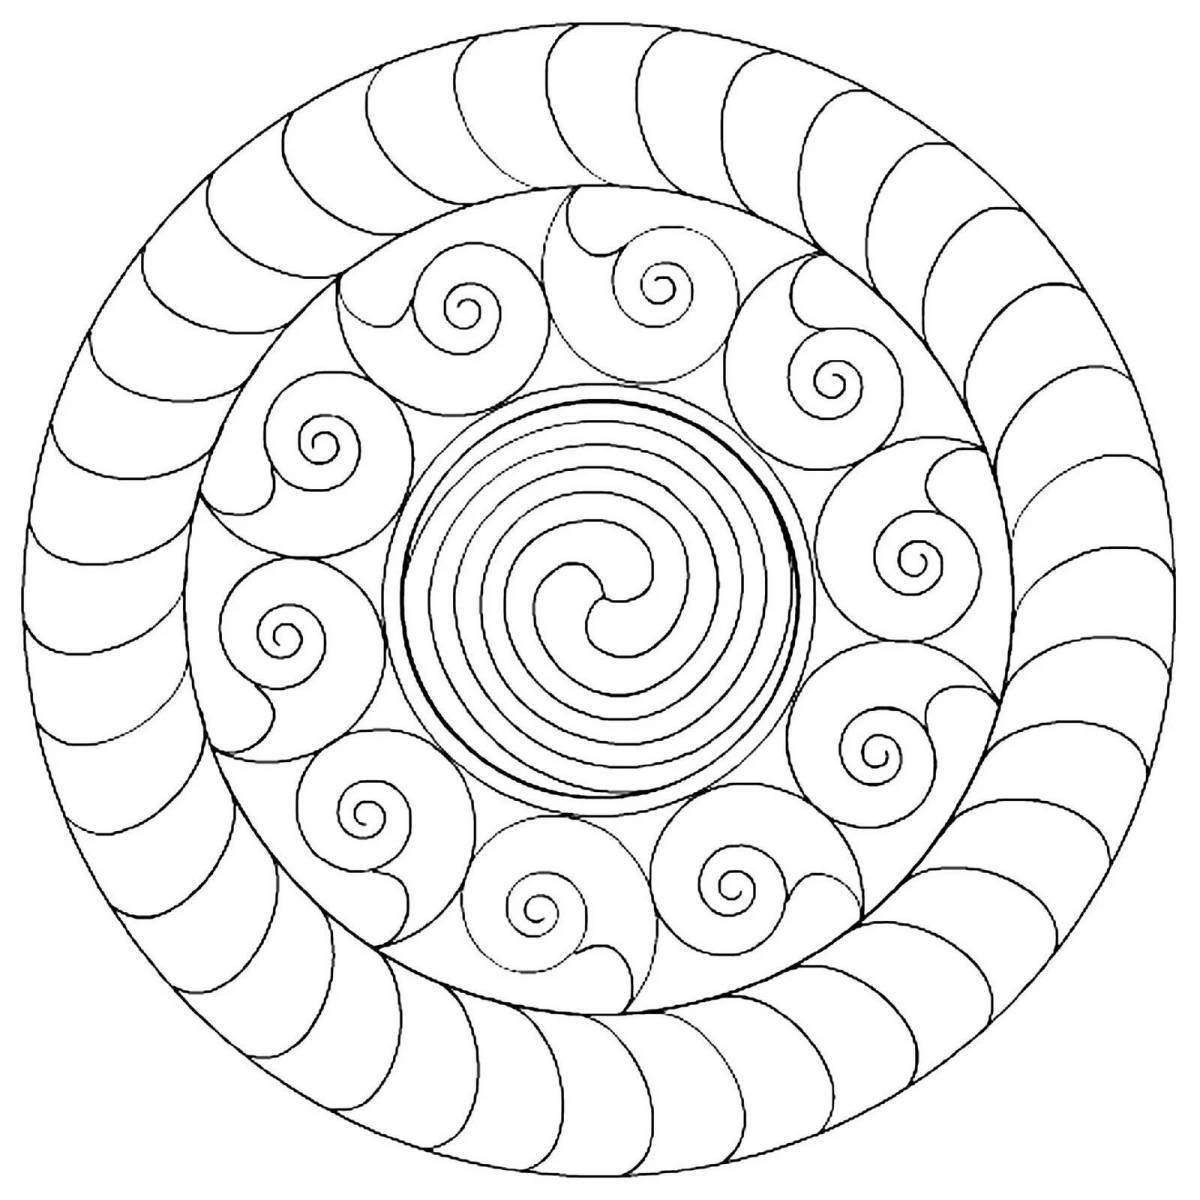 Intriguing spiral coloring